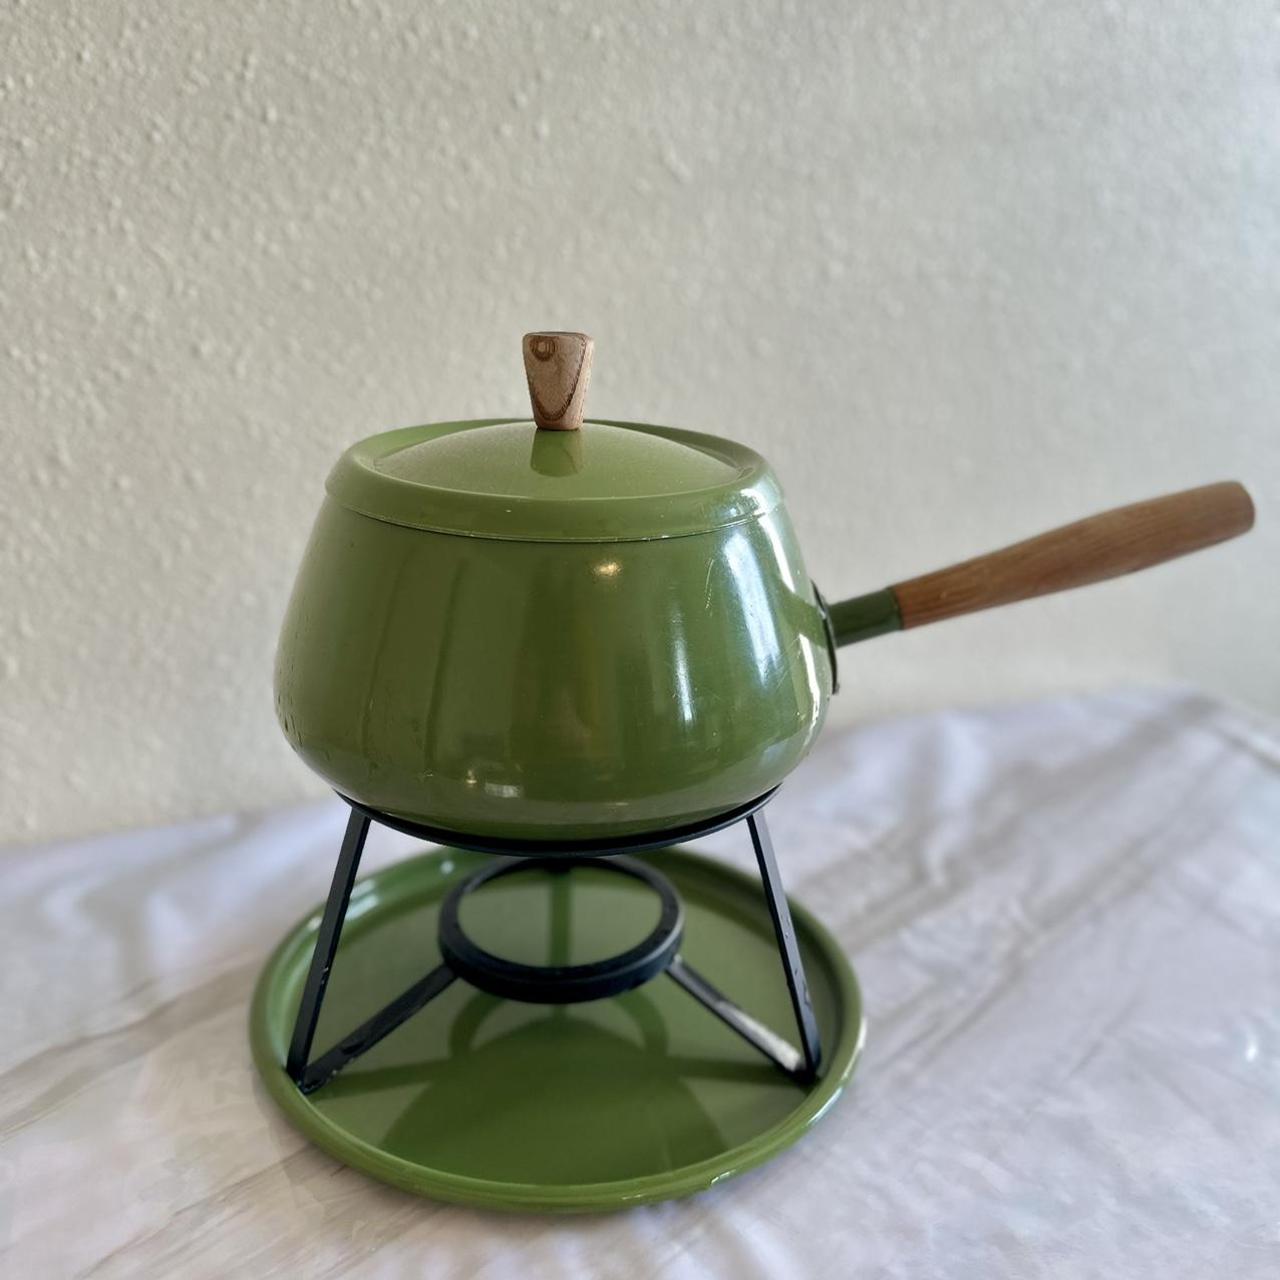 This fondue pot comes with an electric heating base - Depop